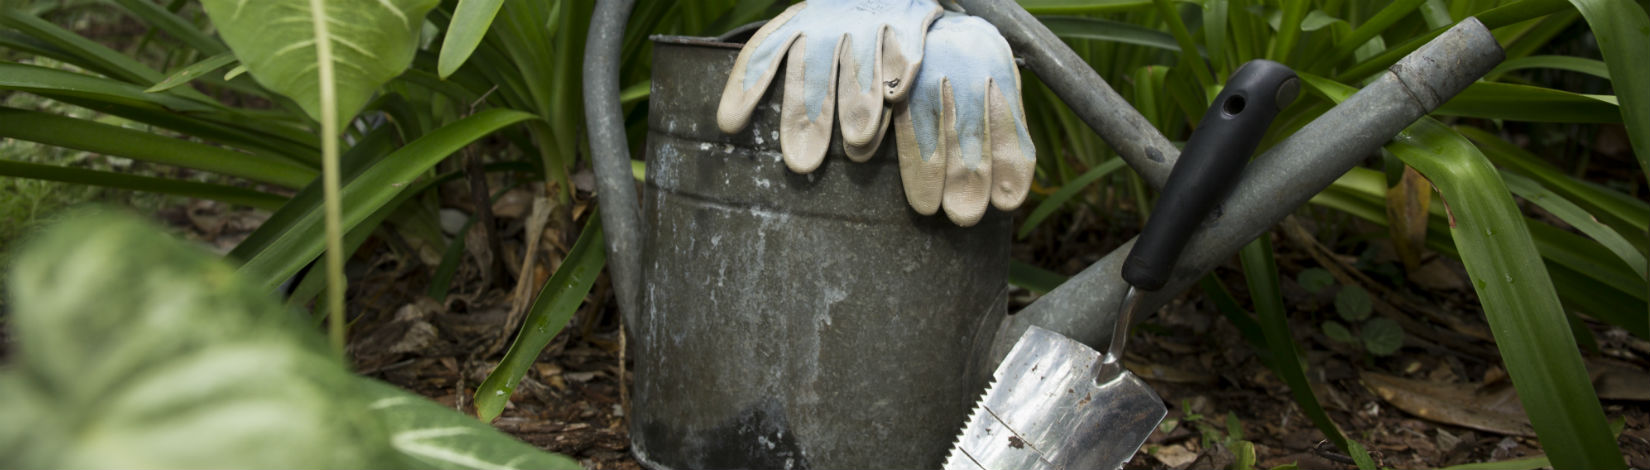 A watering can with gloves and a trowel, set against a vegetated background.